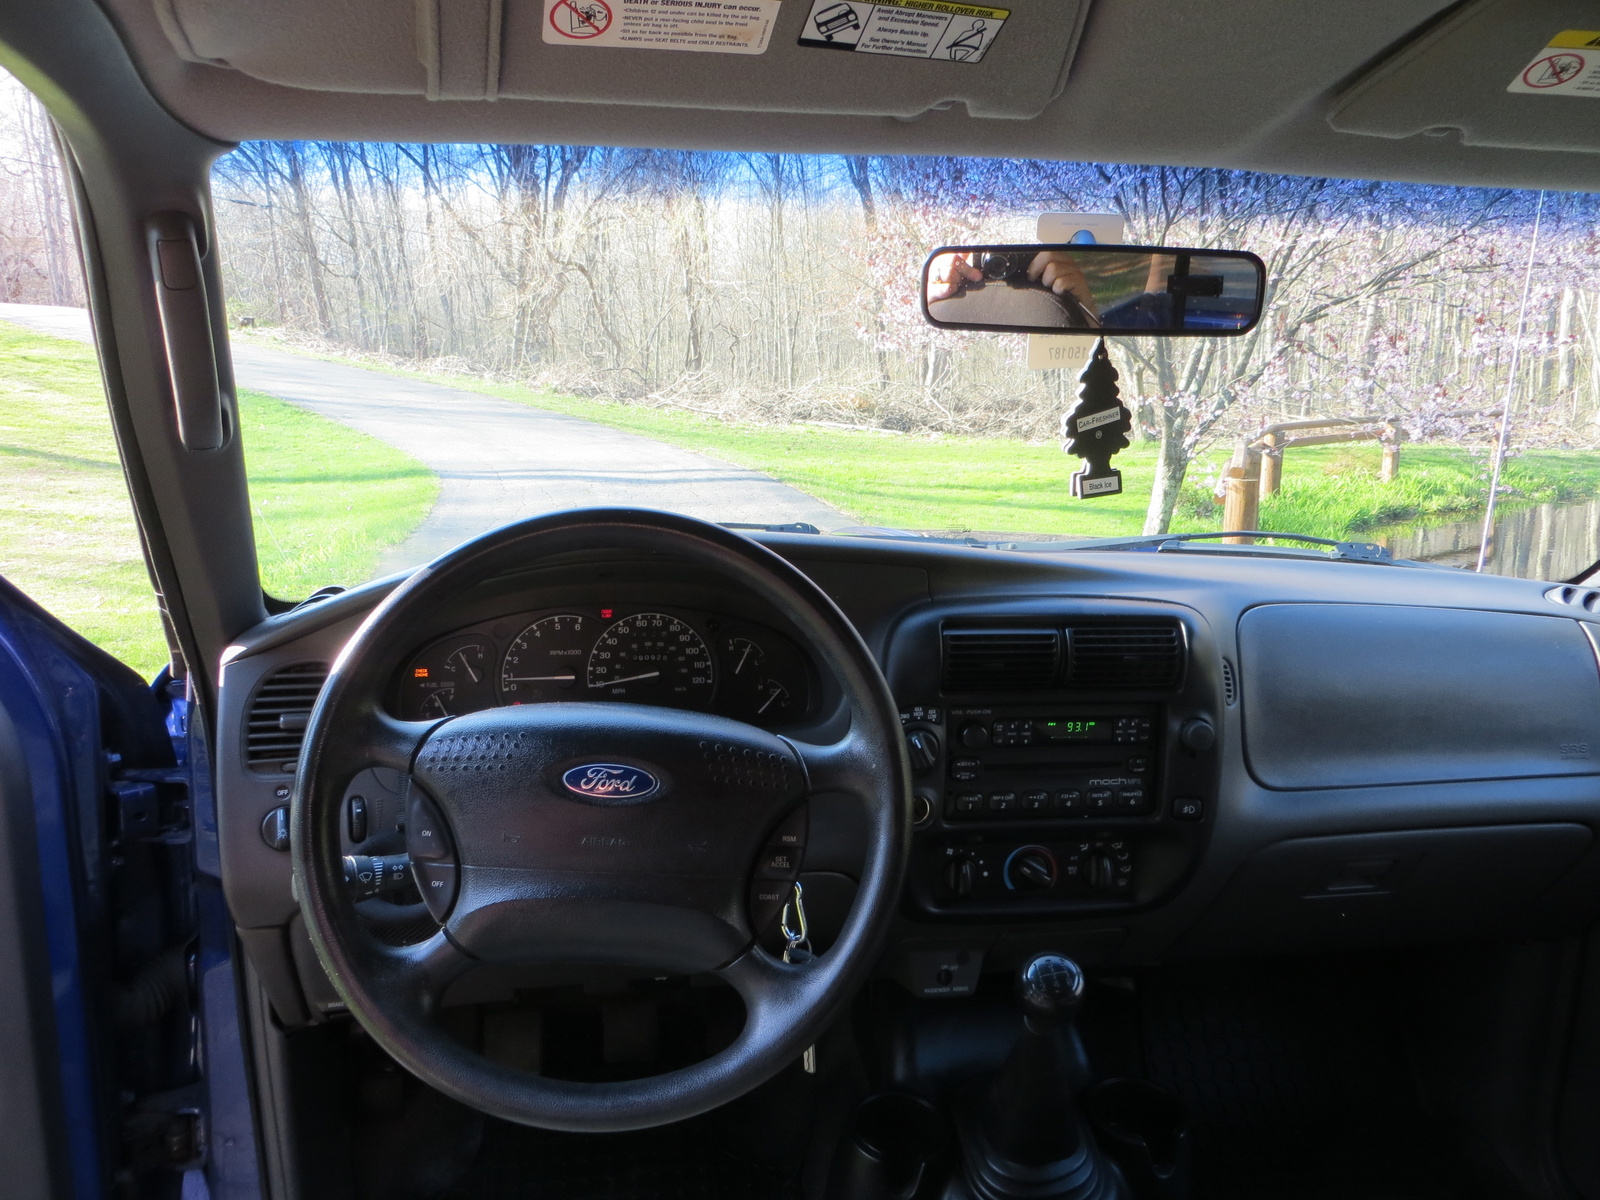 2003 Ford ranger interior pictures #1